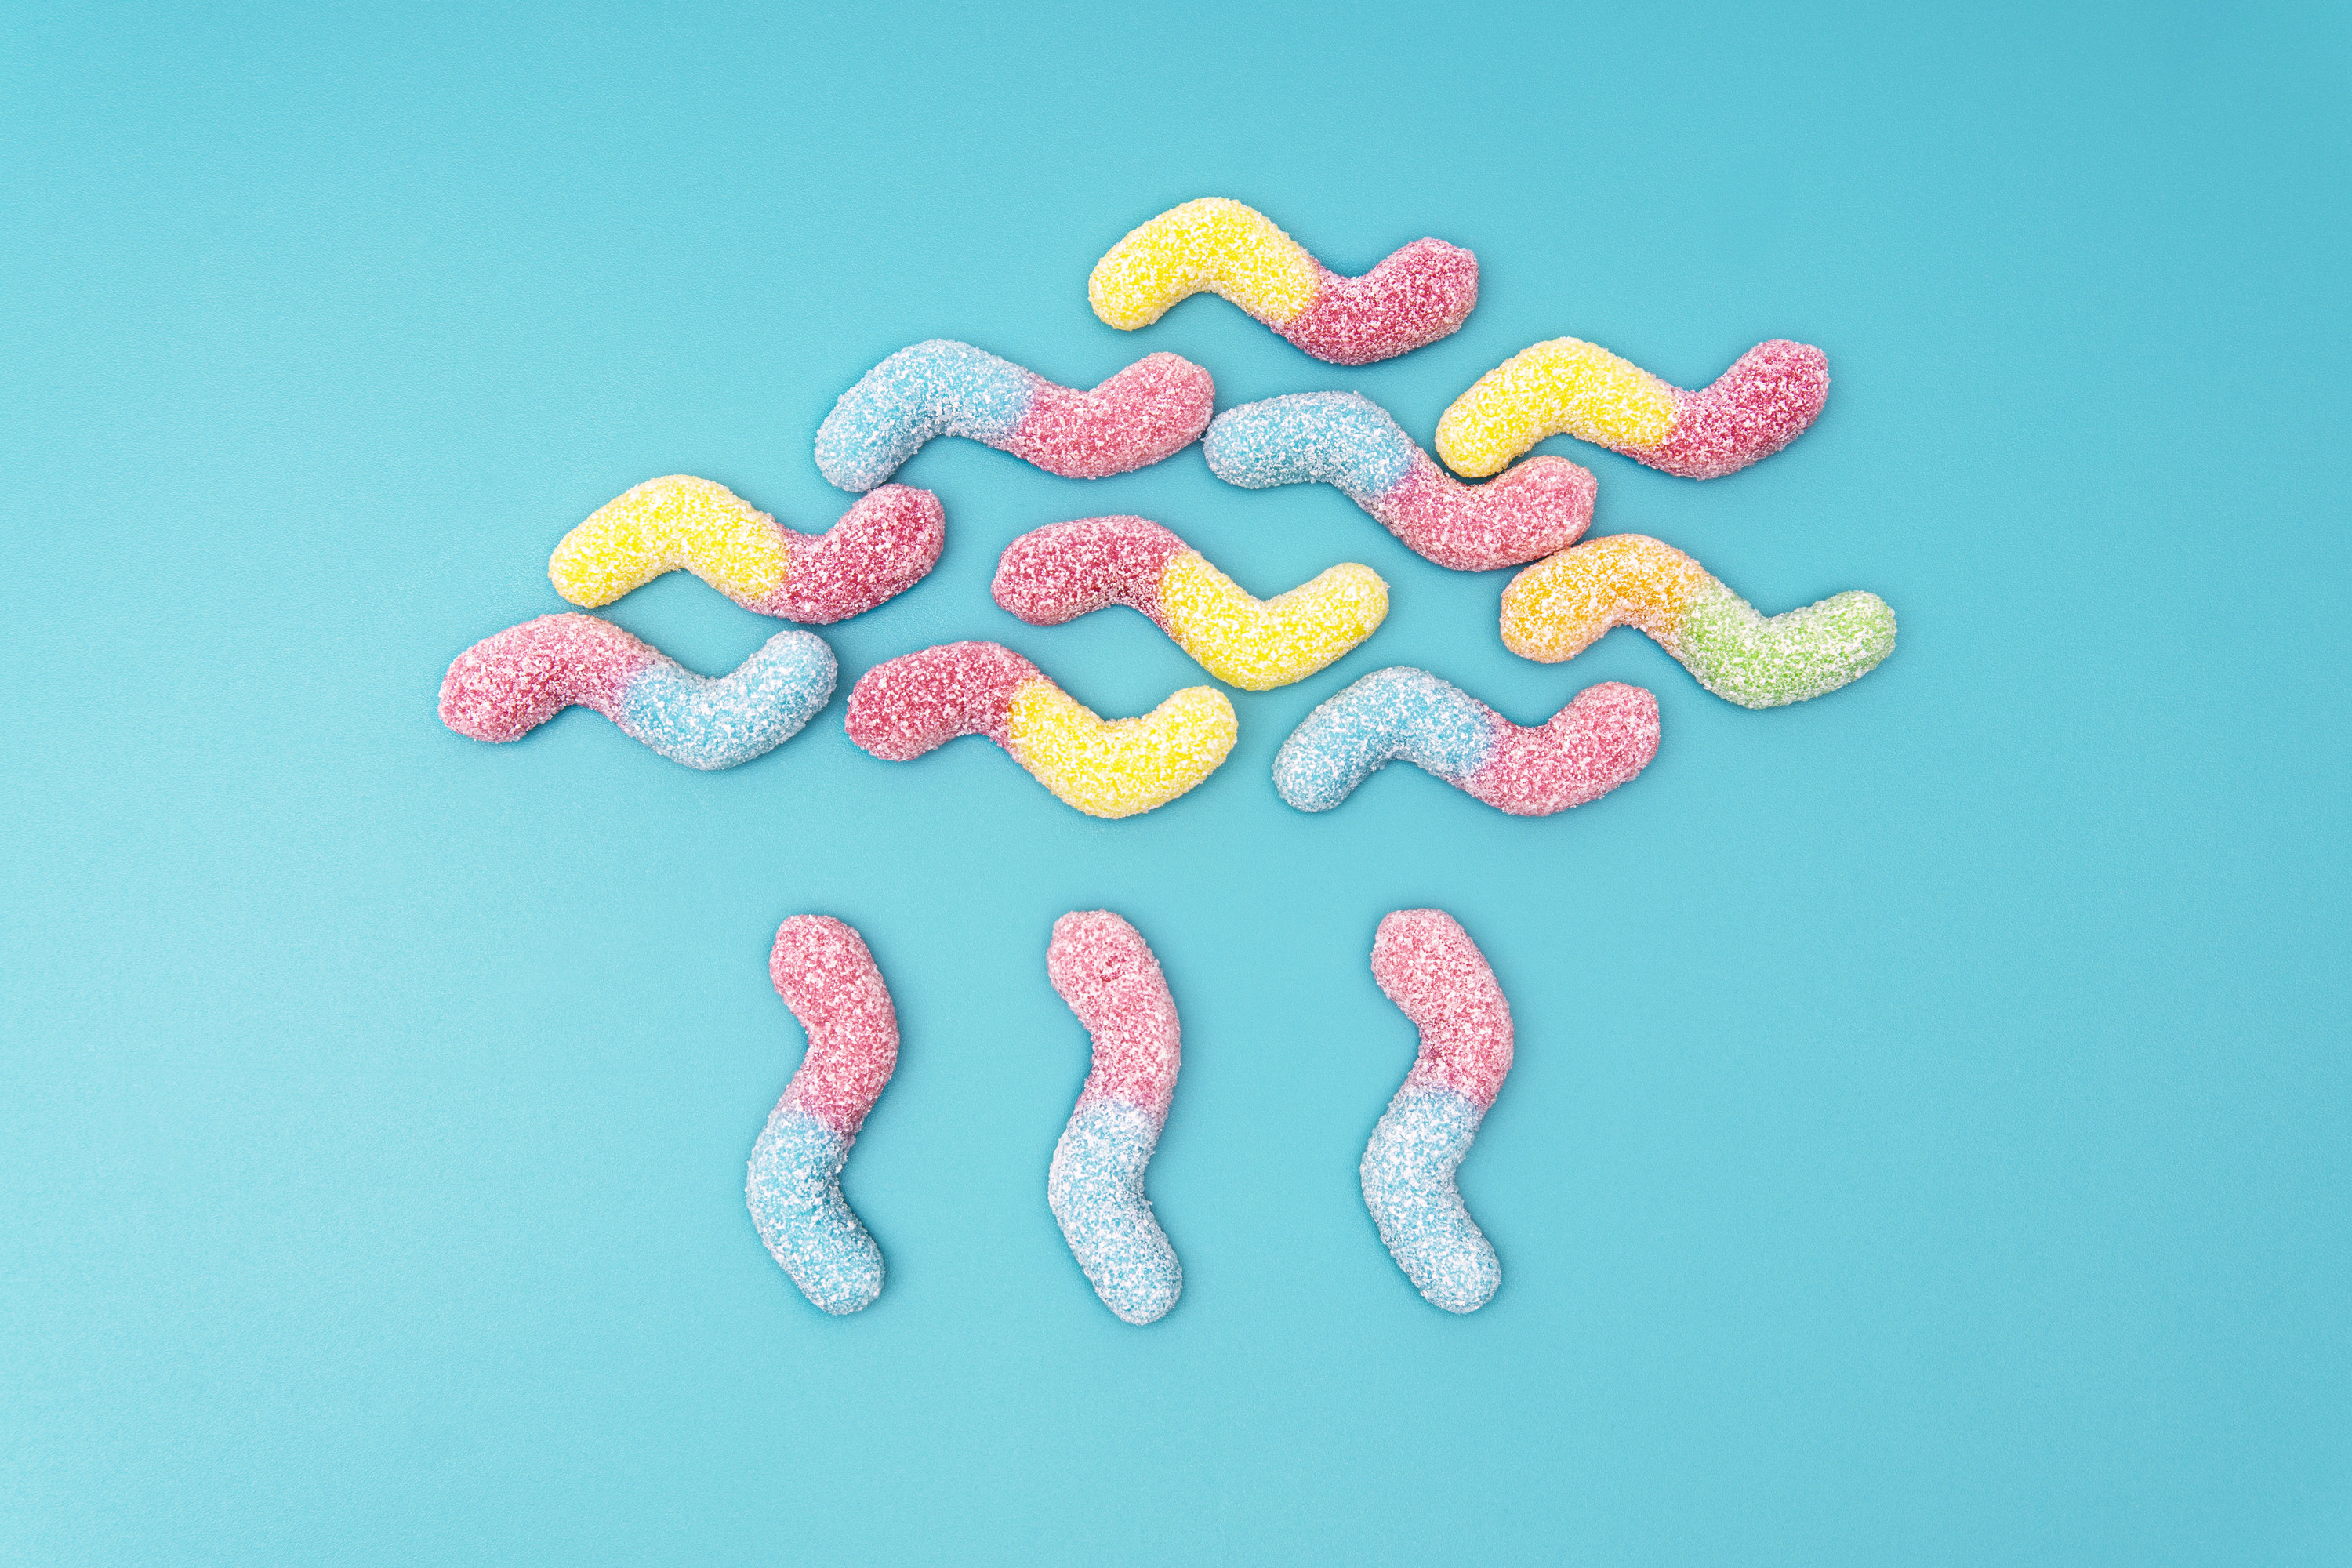 Creative raining cloud flat lay made of colored sugar coated gummy worms on a light blue background